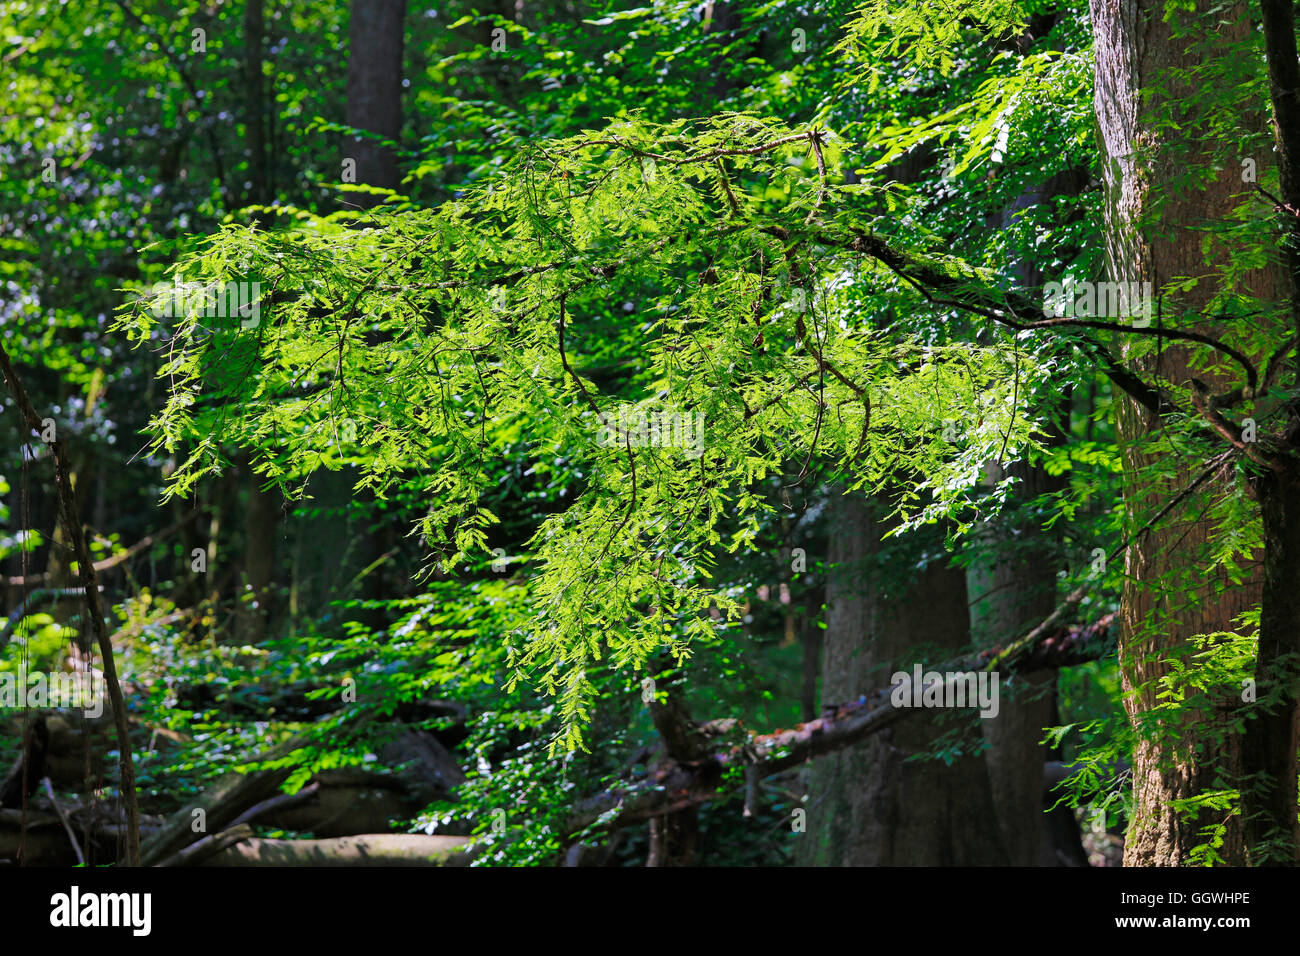 Tree branch in CONGAREE NATIONAL PARK known for its pristine natural environment - SOUTH, CAROLINA Stock Photo